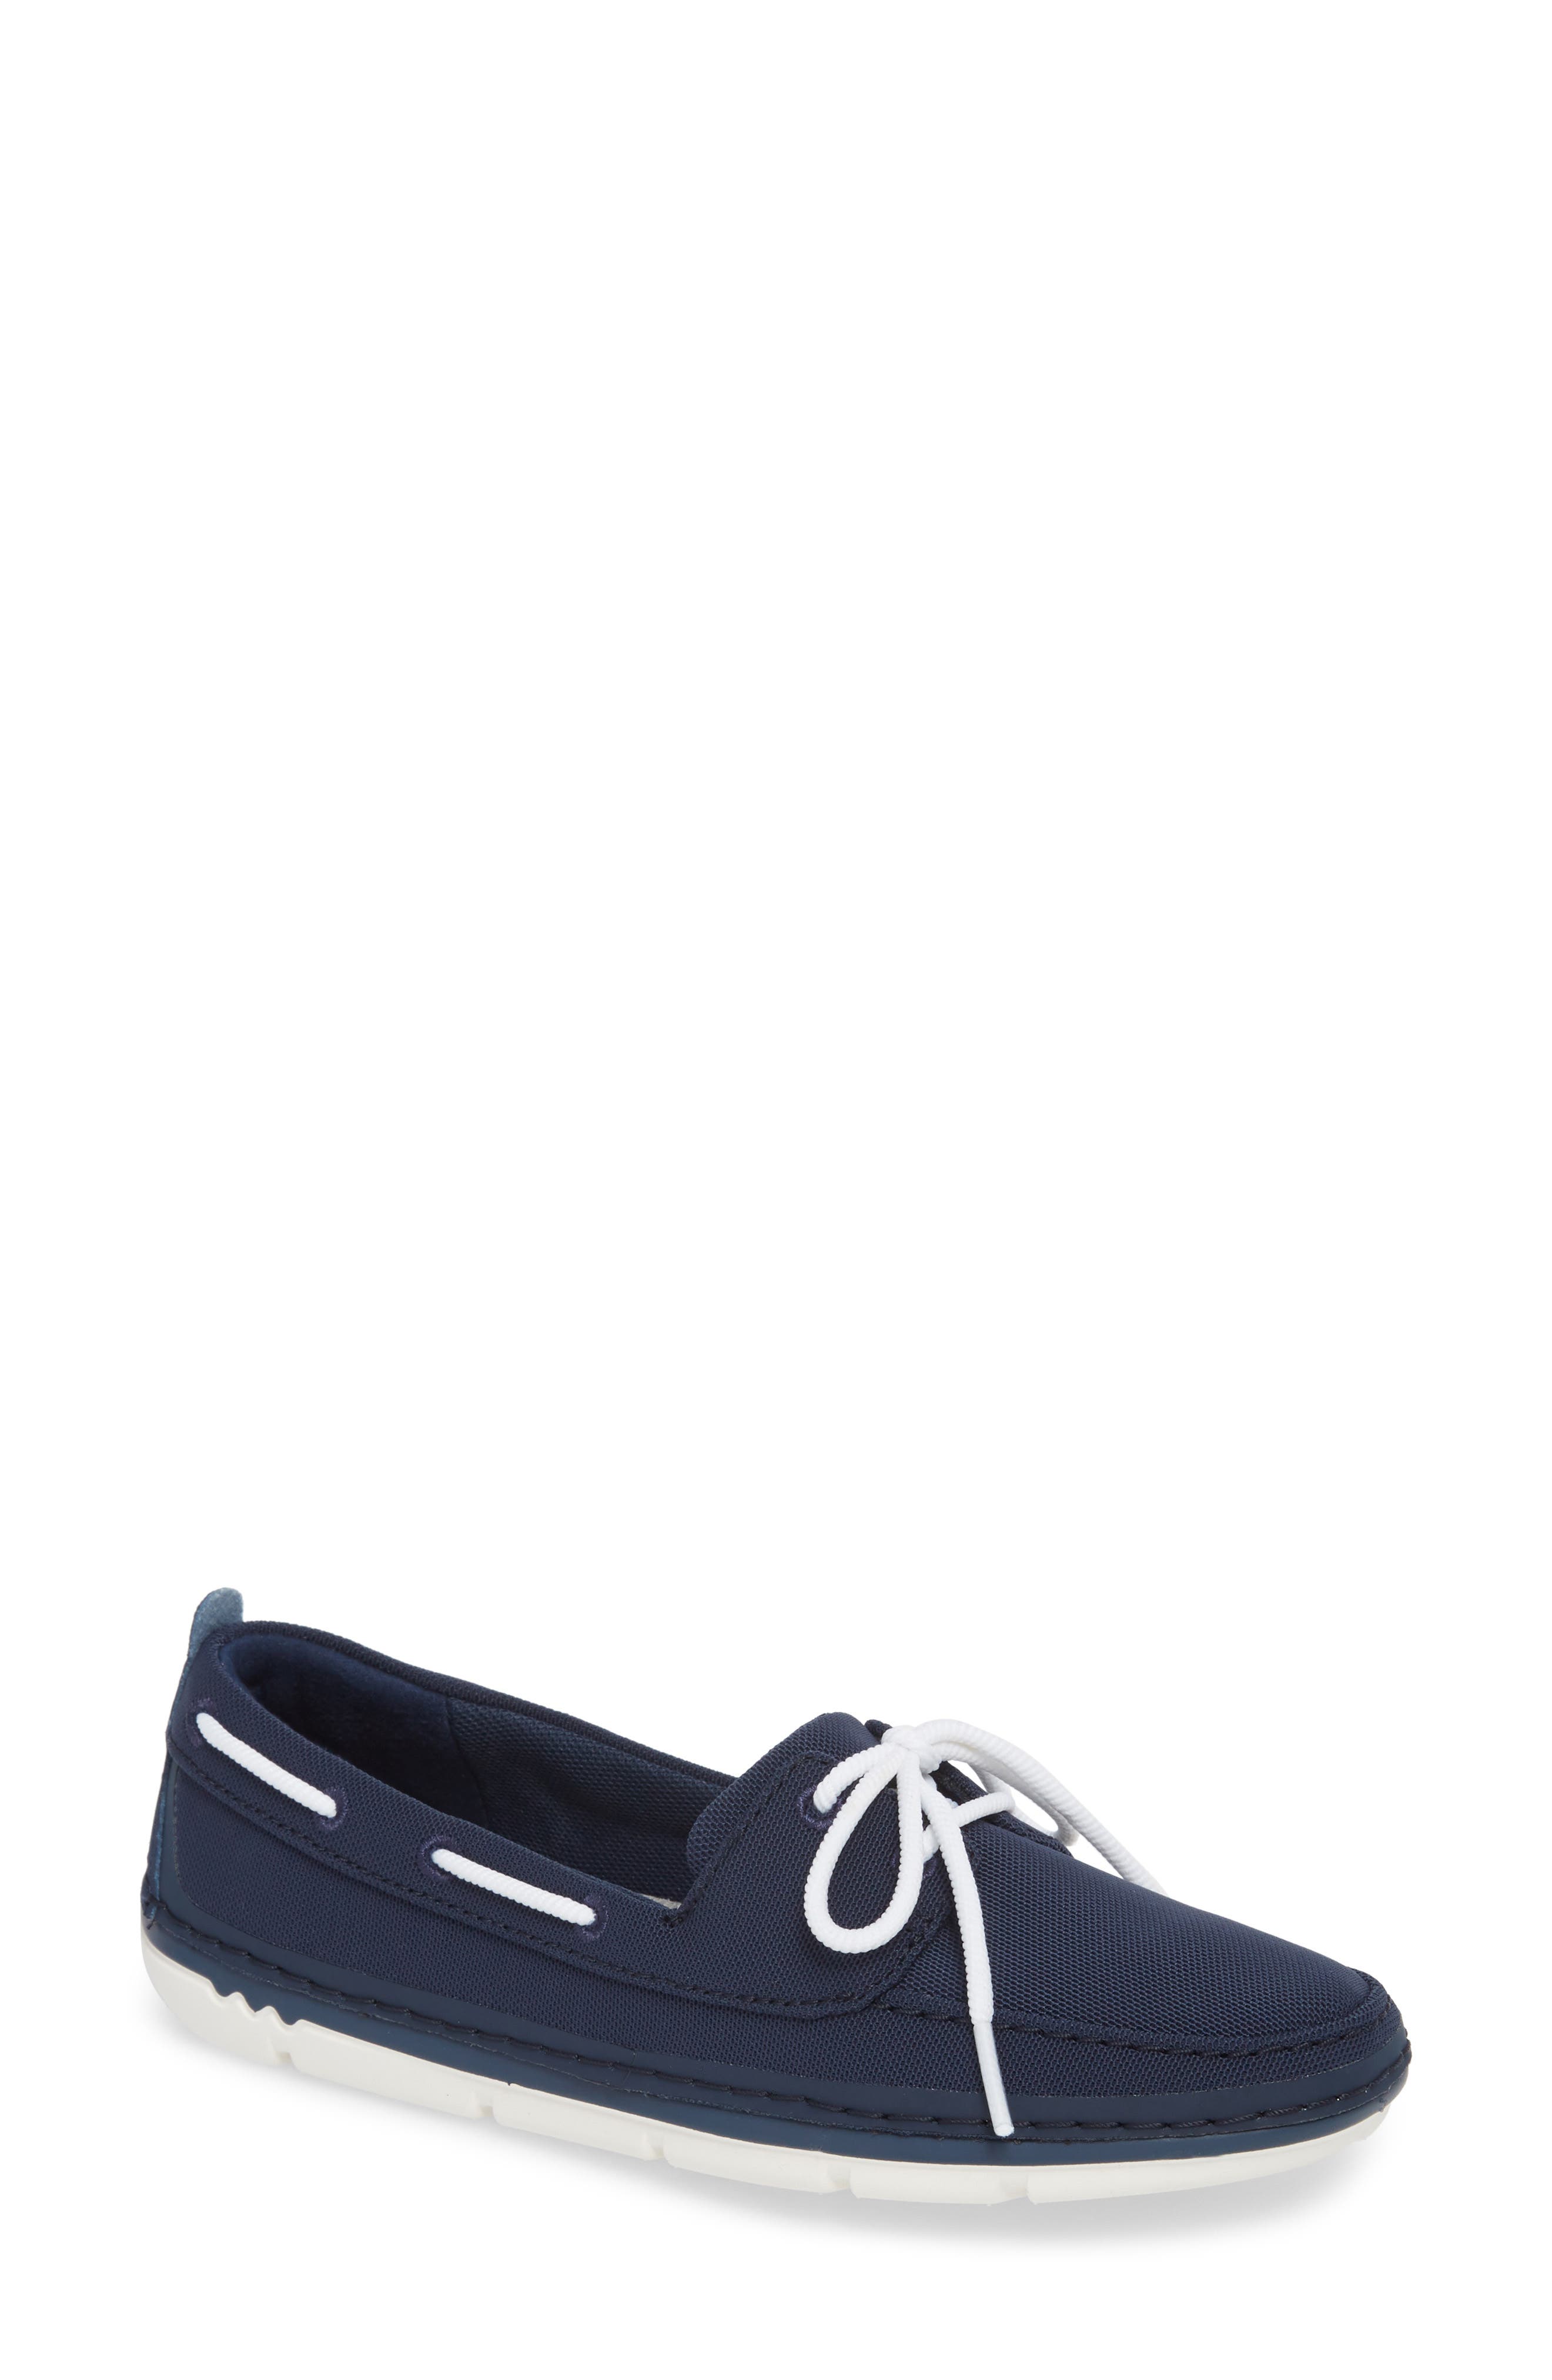 Boat Shoes Clearance Shoes | Nordstrom